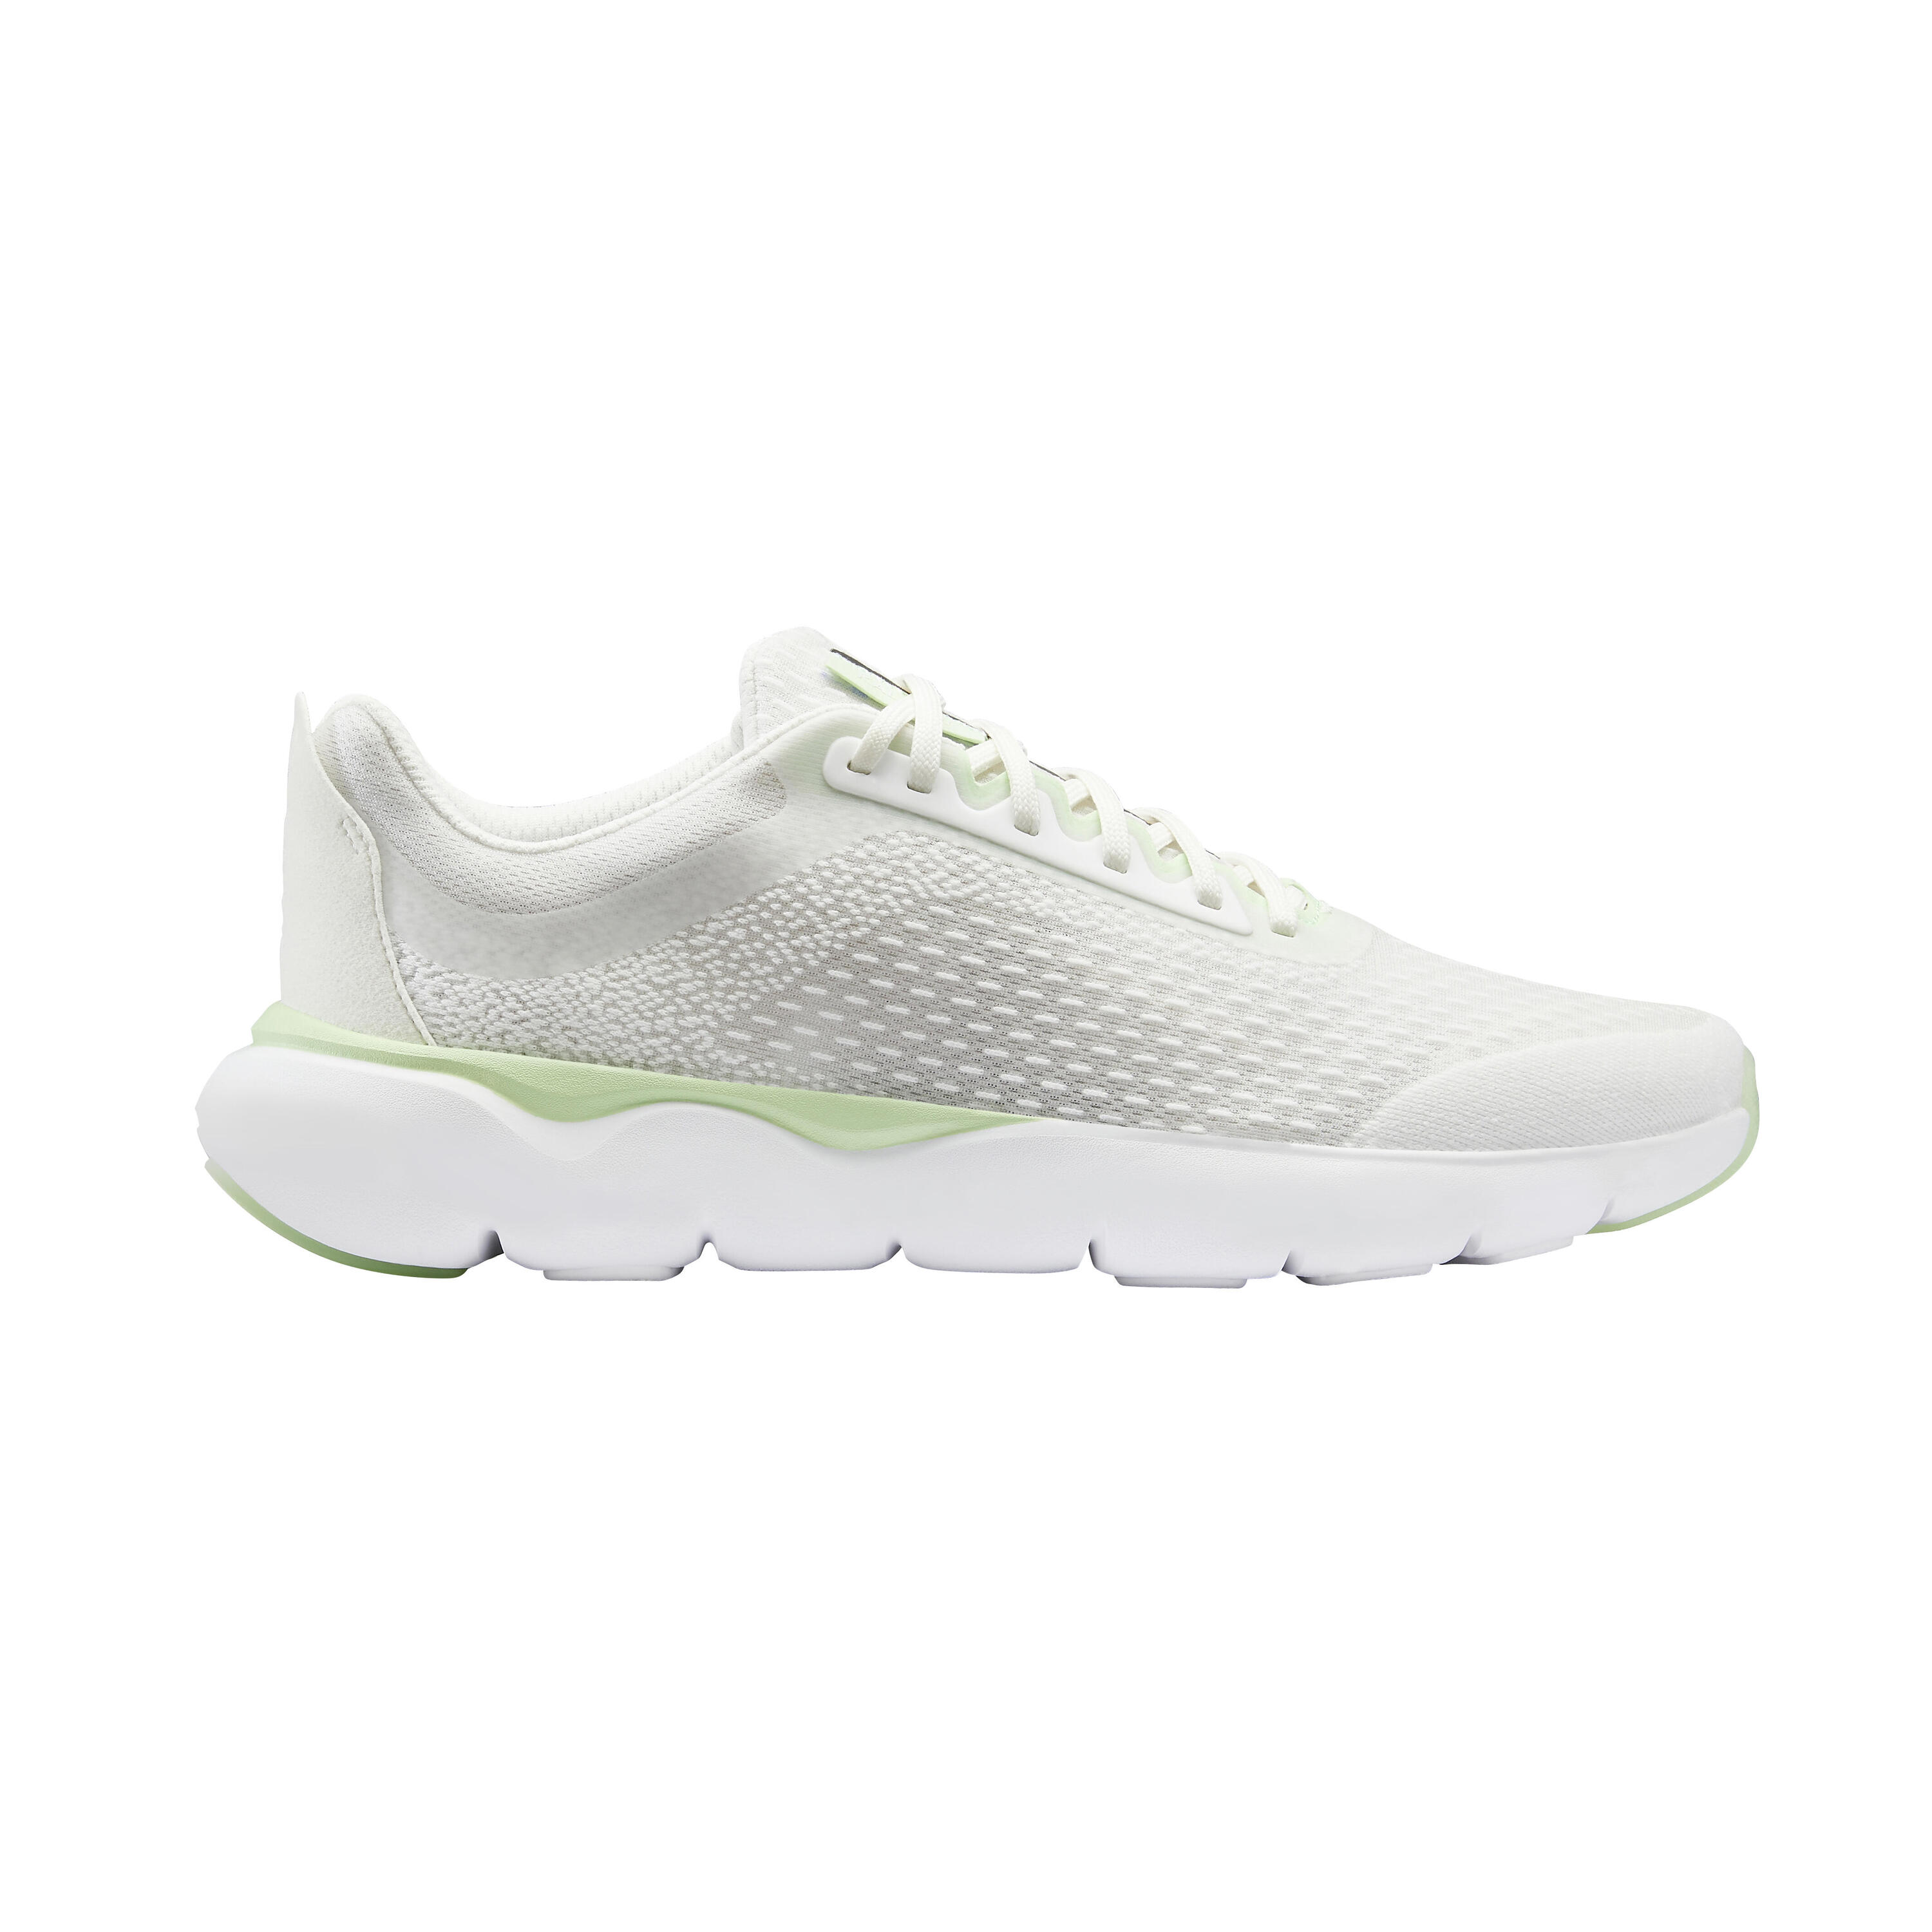 JOGFLOW 500.1 Men's running shoes - Light Green and Off-White 13/13